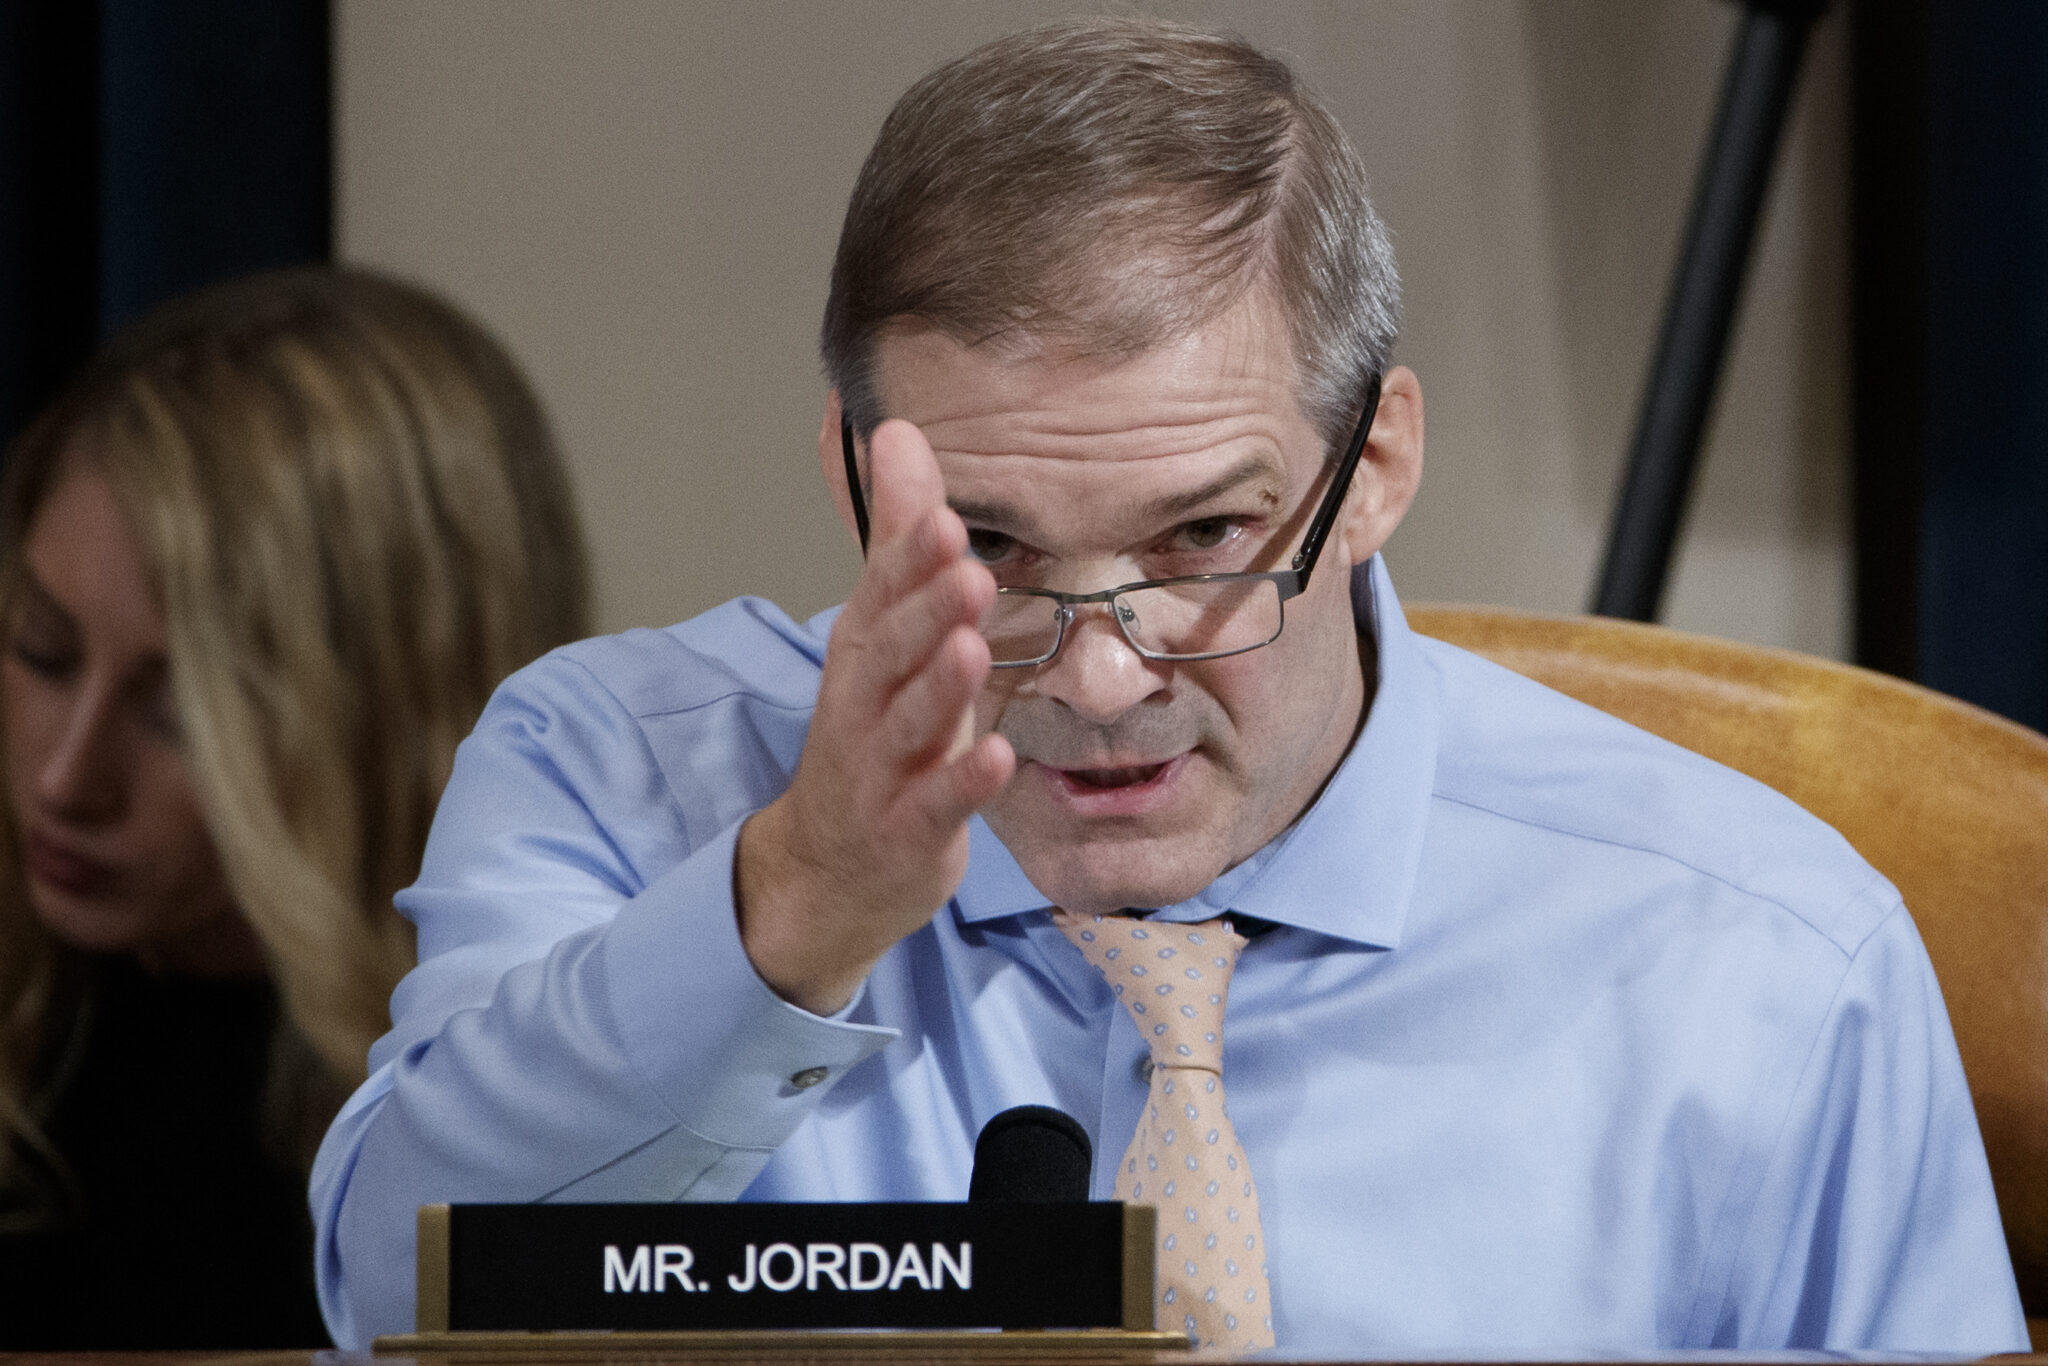 Republican Representative from Ohio Jim Jordan questions Special Advisor for Europe and Russia in the office of US Vice President Mike Pence, Jennifer Williams and Director for European Affairs of the National Security Council, US Army Lieutenant Colonel Alexander Vindman during the House Permanent Select Committee on Intelligence public hearing on the impeachment inquiry into US President Donald Trump, on Capitol Hill in Washington,DC on November 19, 2019. - President Donald Trump faces more potentially damning testimony in the Ukraine scandal as a critical week of public impeachment hearings opens Tuesday in the House of Representatives. (Photo by SHAWN THEW / POOL / AFP) (Photo by SHAWN THEW/POOL/AFP via Getty Images)